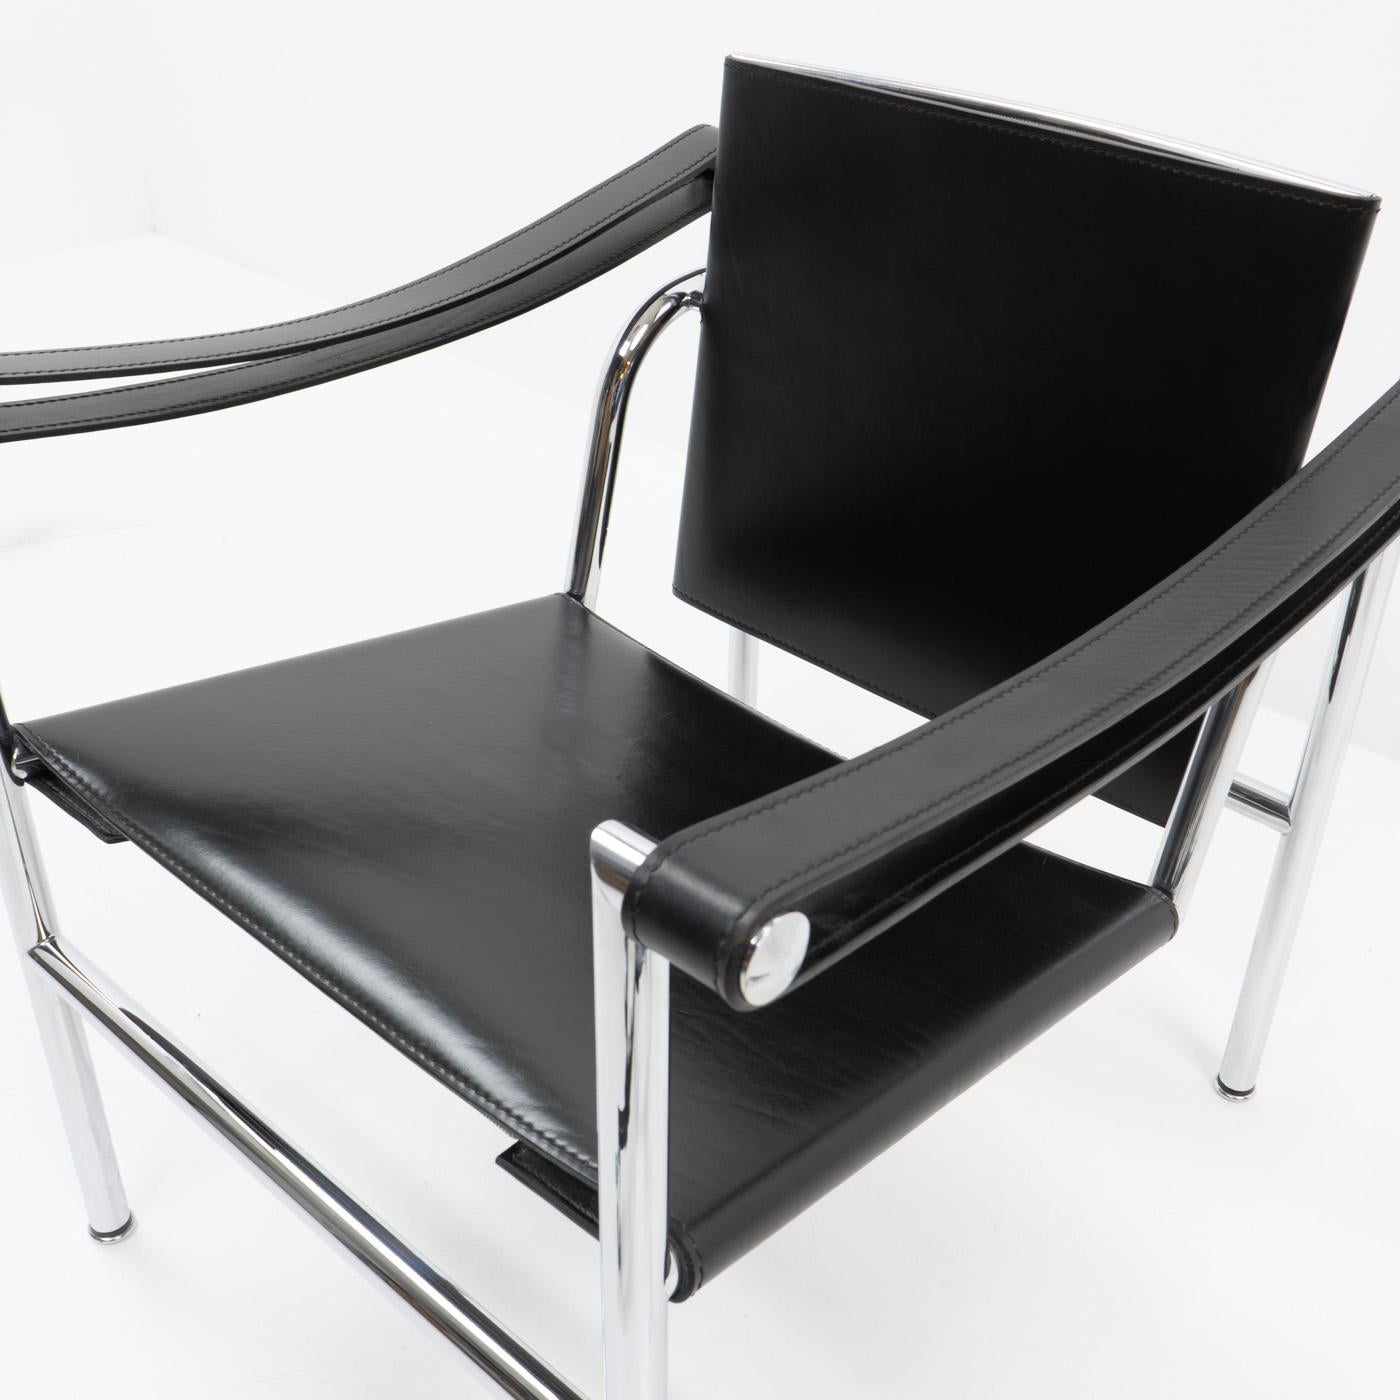 Late 20th Century LC1 Chair by Le Corbusier, Pierre Jeanneret, Charlotte Perriand for Cassina